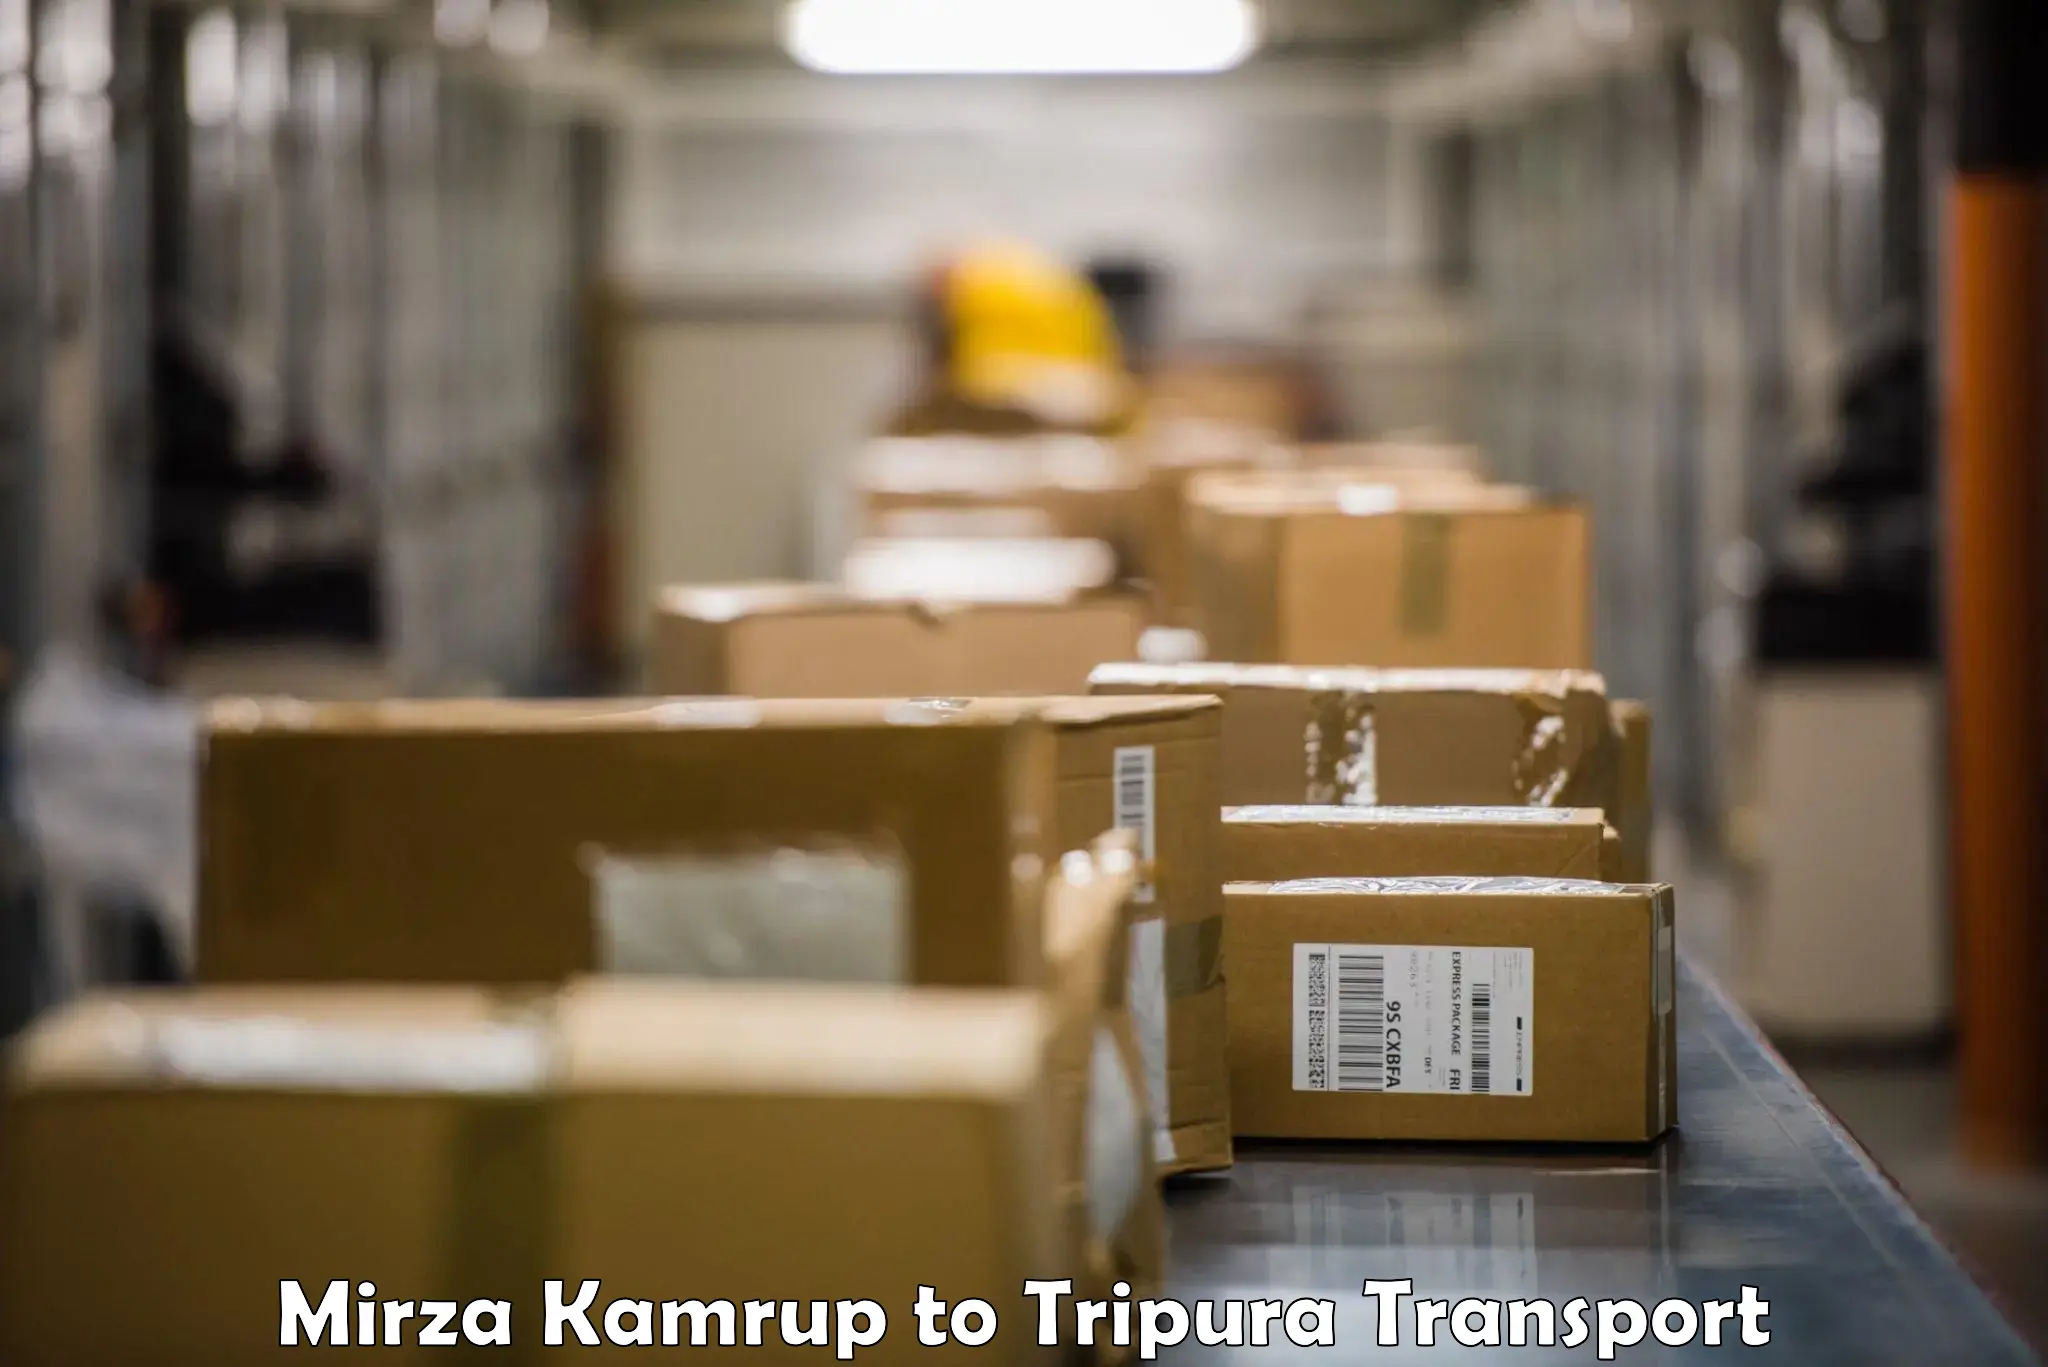 Commercial transport service Mirza Kamrup to Agartala